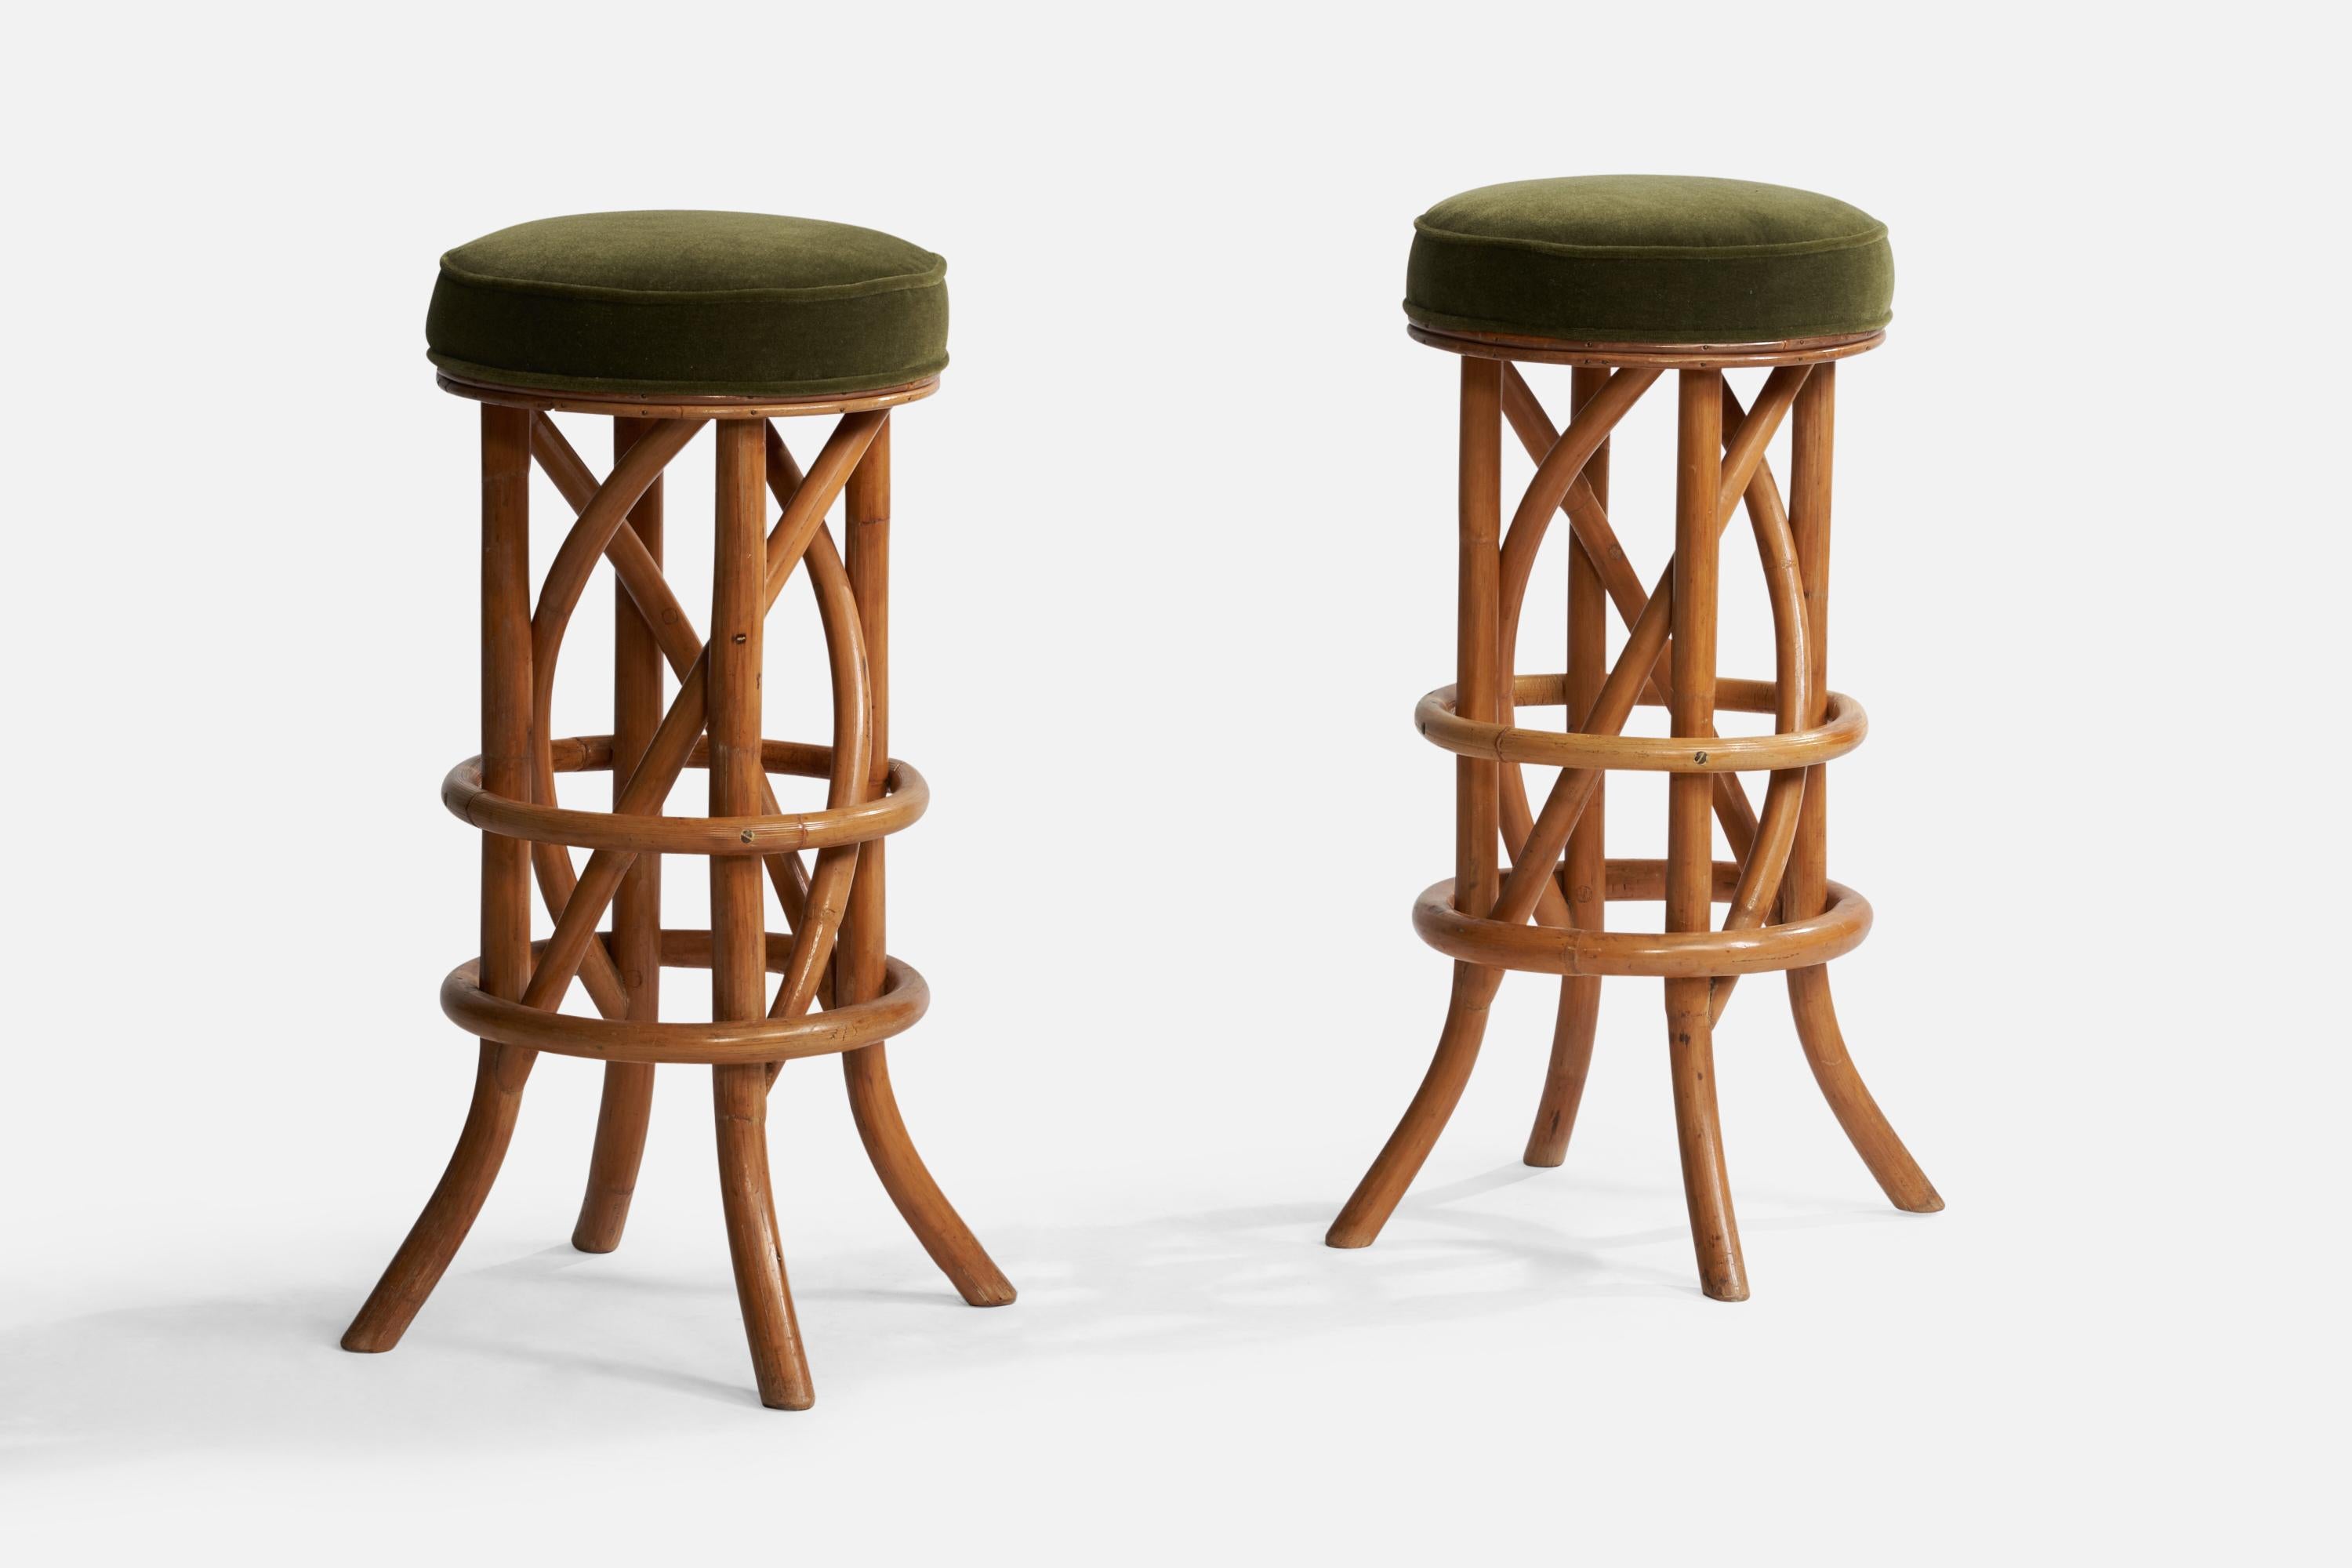 A pair of moulded bamboo and green mohair bar stools designed and produced in the US, c. 1950s.

Seat height: 31.5”